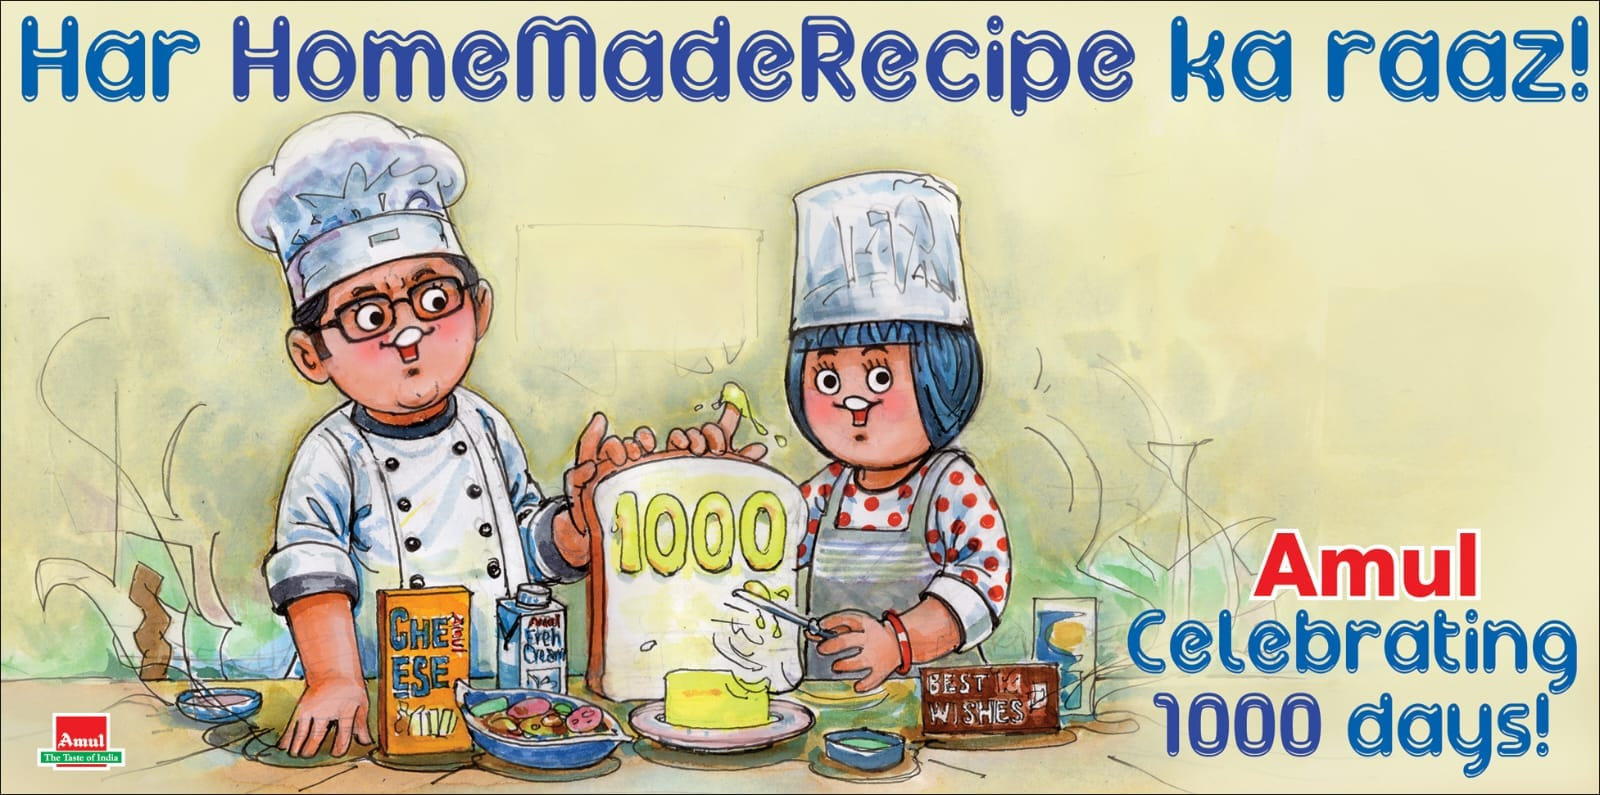 Amul's topical ads and social media marketing